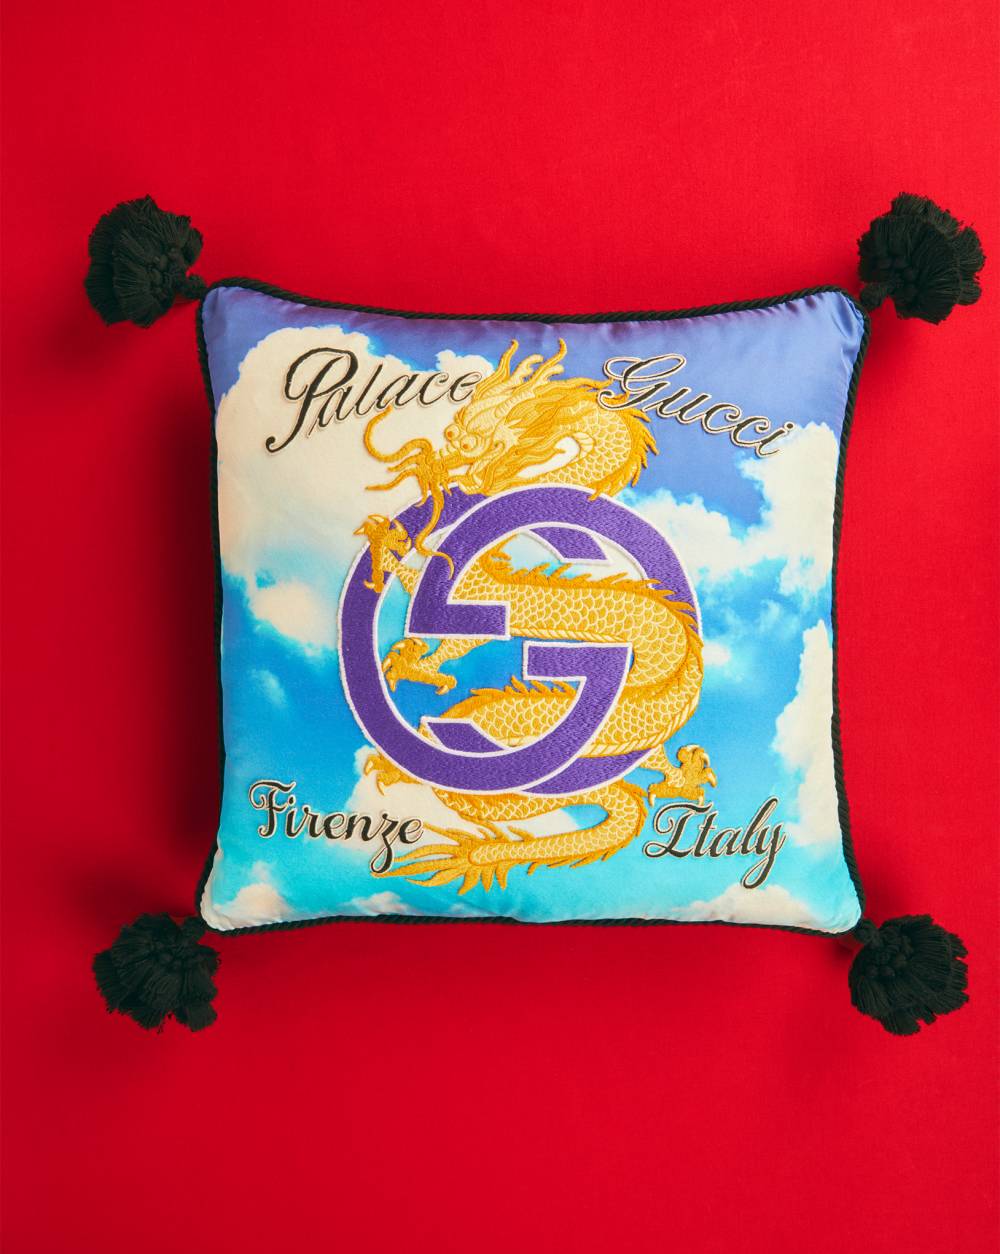 Printed silk pillow with patches by Palace Gucci